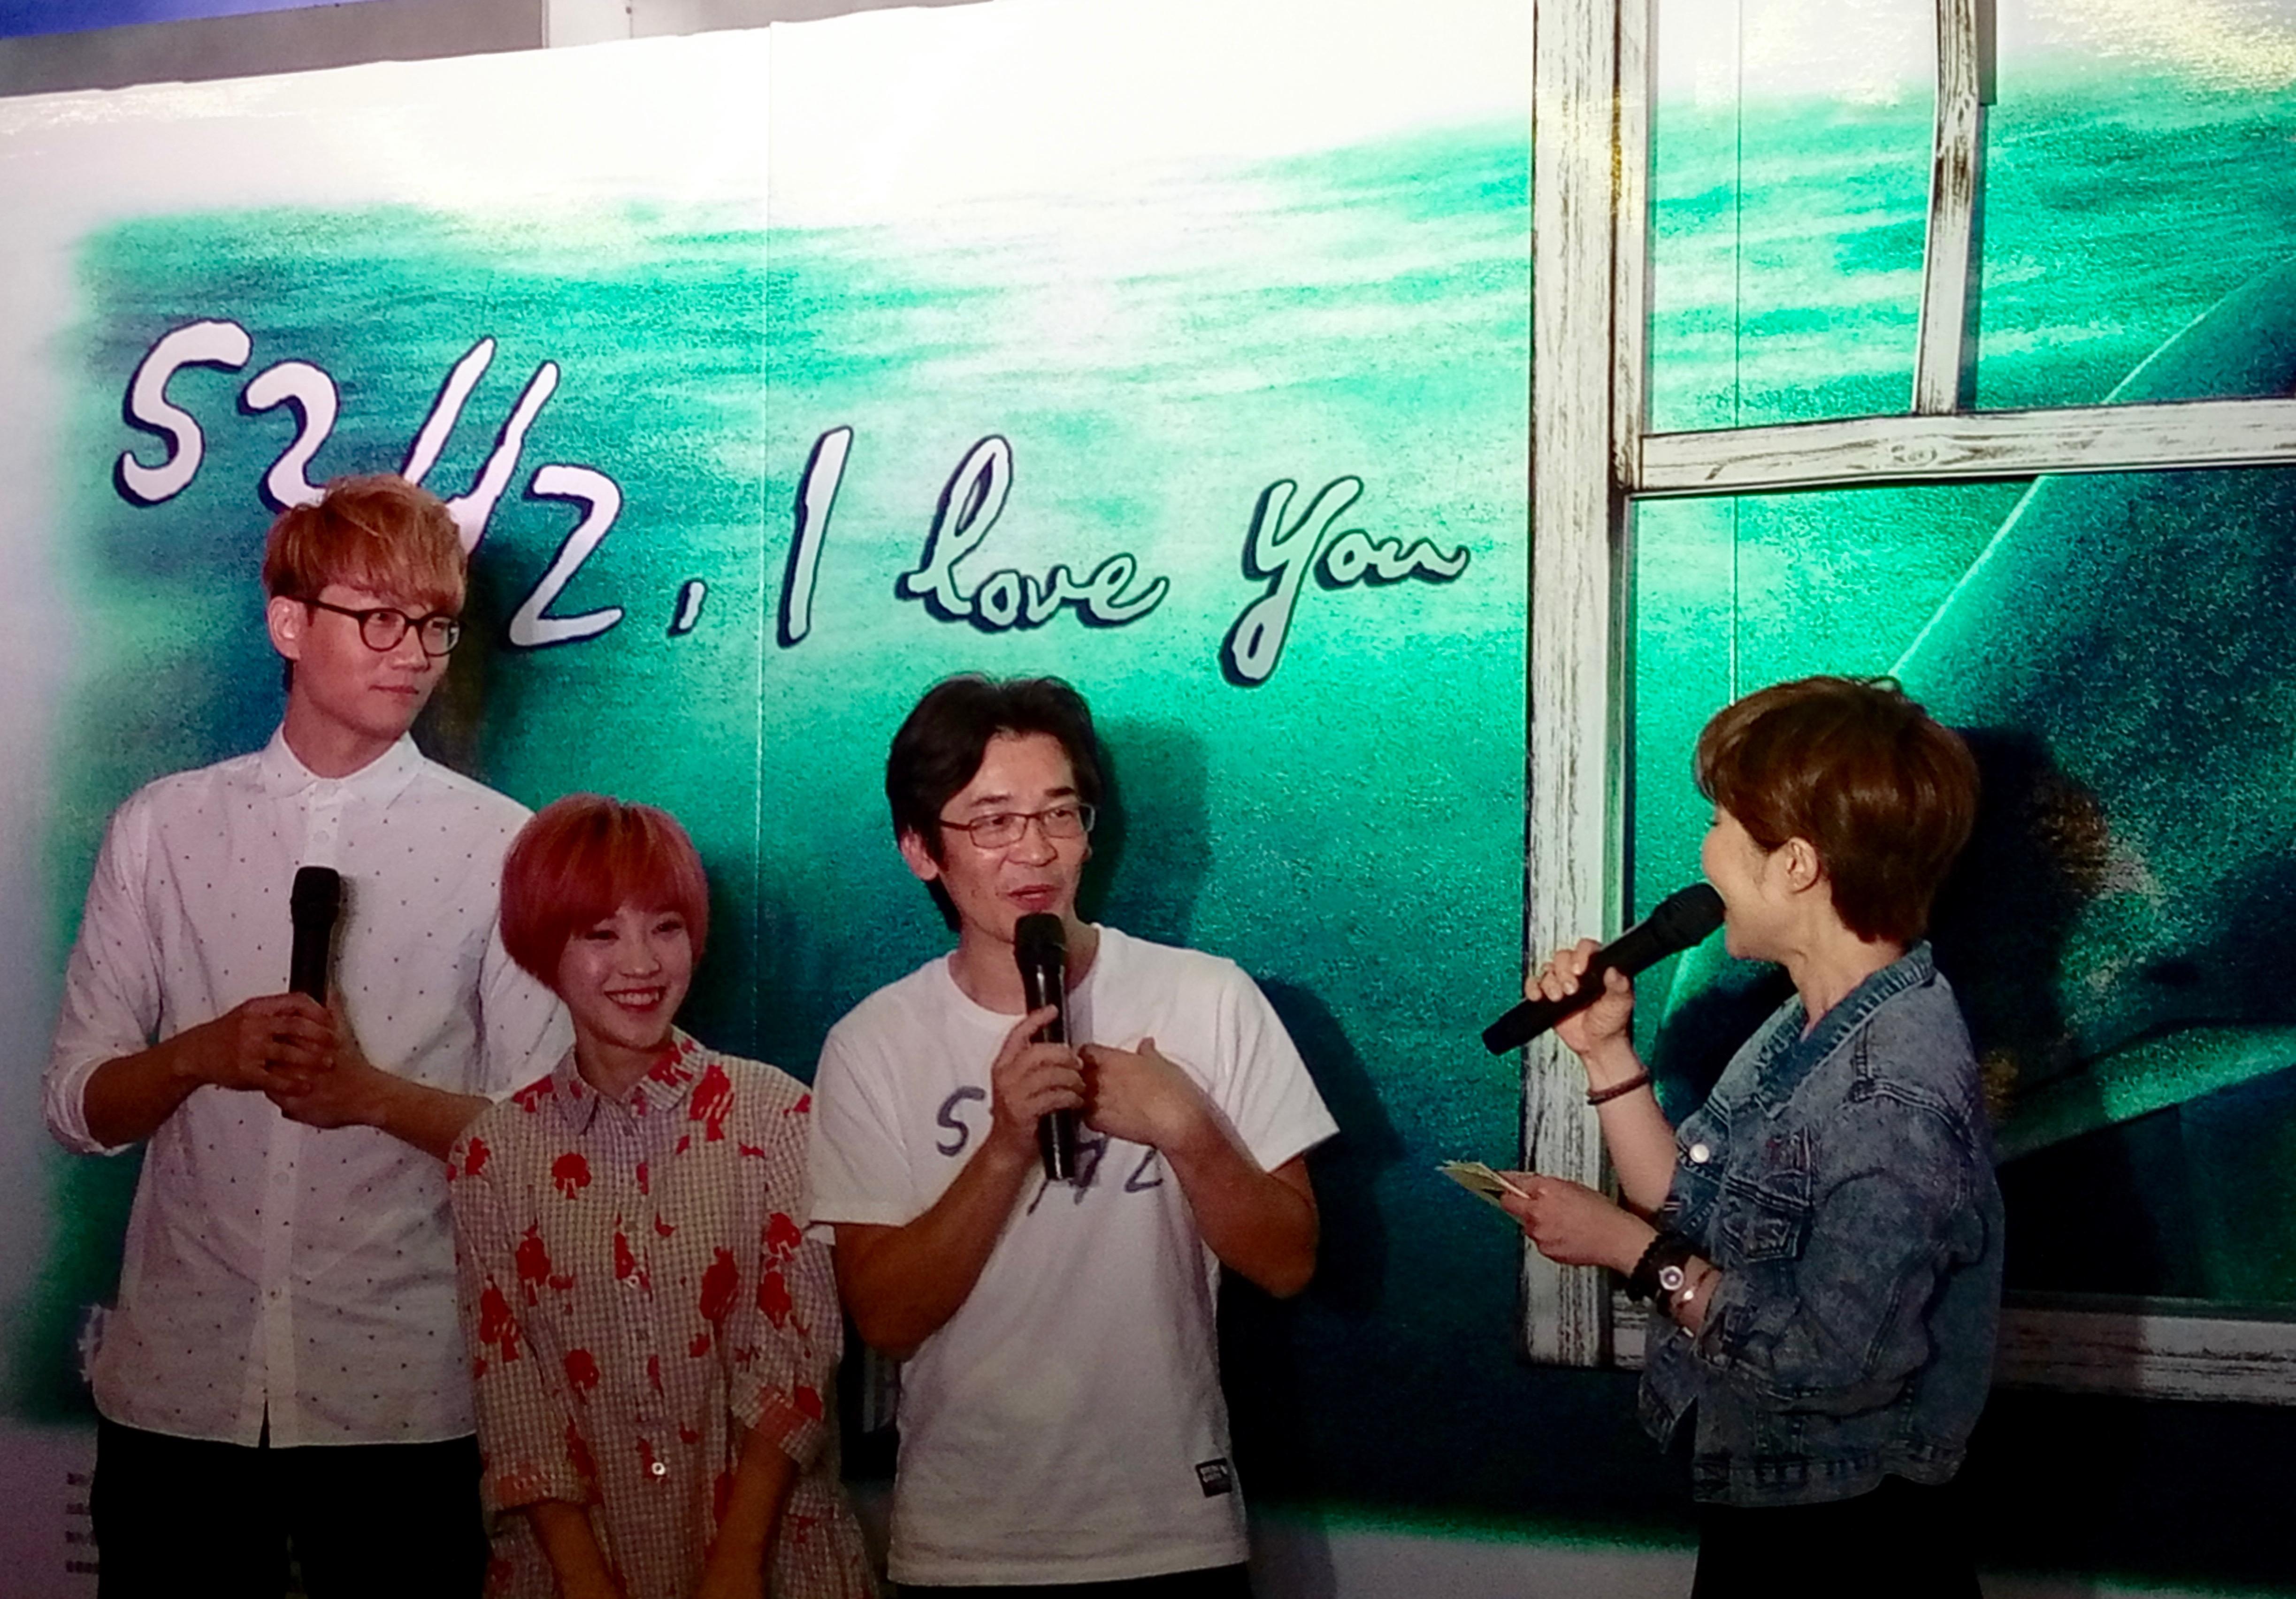  (8 Feb, 2017) Wei Te-sheng (2nd from right), a well-known film director from Taiwan coming to Malaysia to promote his latest movie “52Hz, I Love You” together with the main actors who are the pop singers Lin Zhong-yu (1st from left) and Zhuang Juan-ying (2nd from left) and received good response.